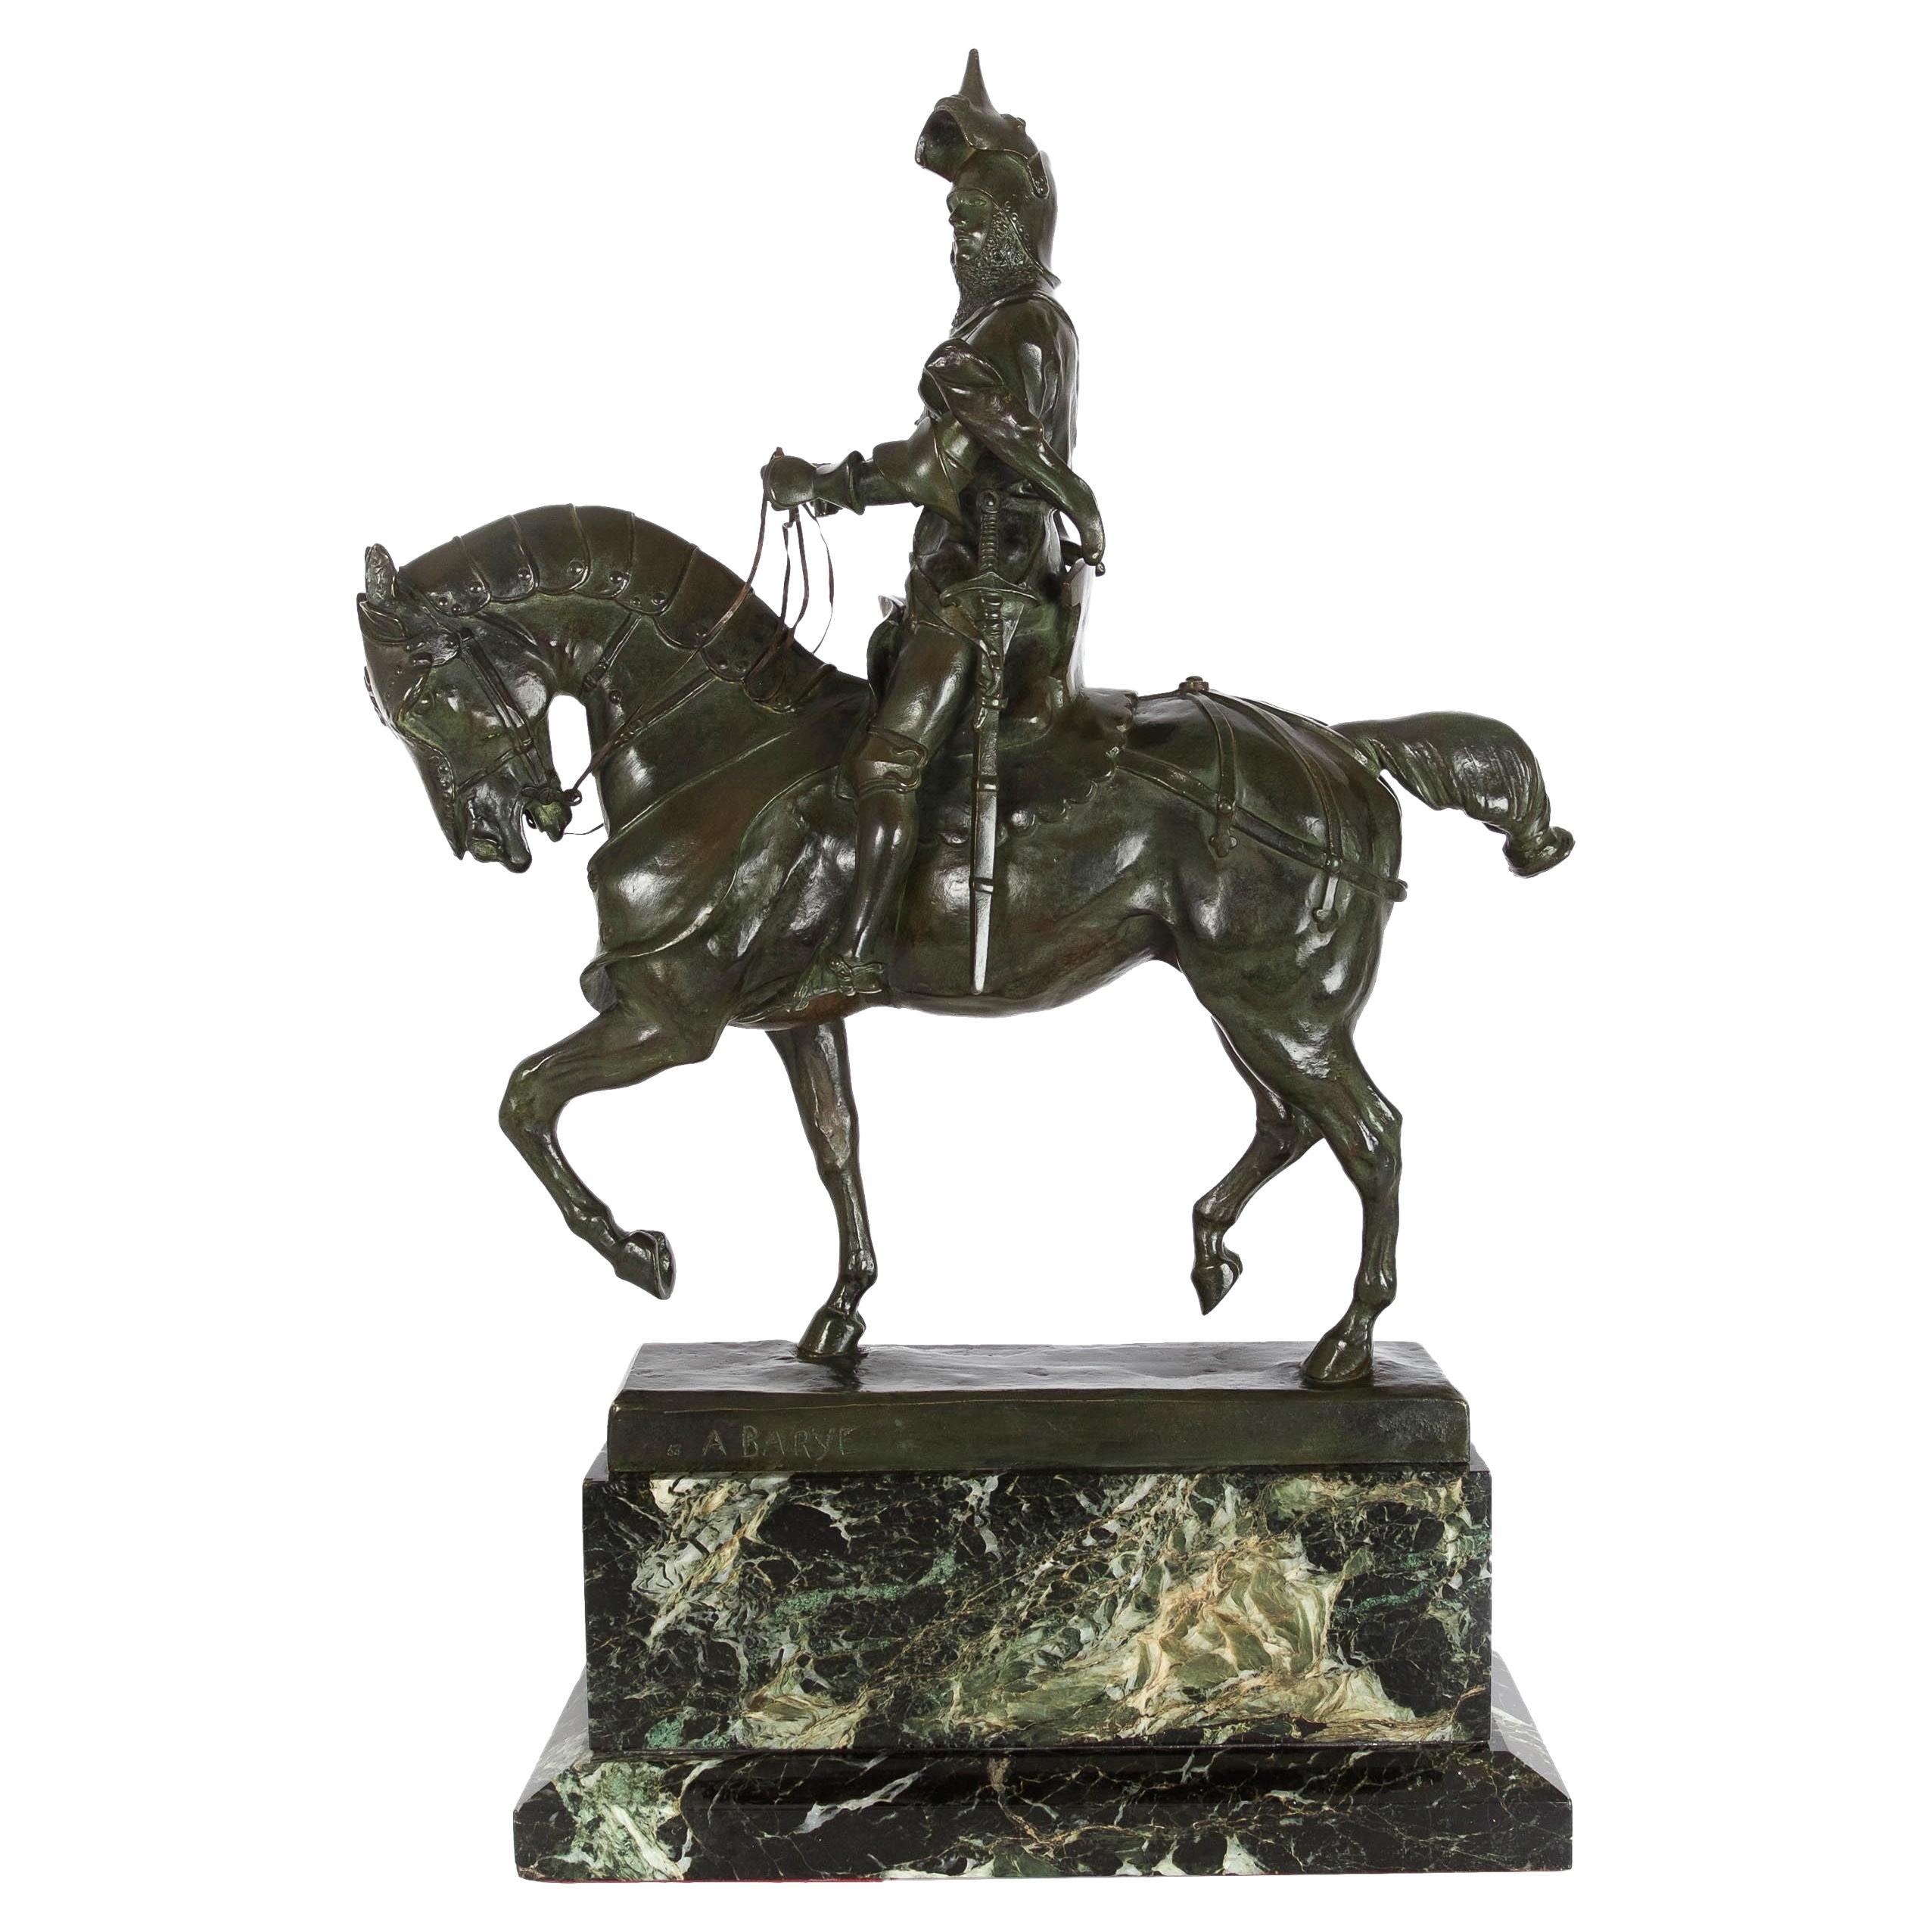 Rare French Antique Bronze Sculpture "Knight on Horseback" by Alfred Barye